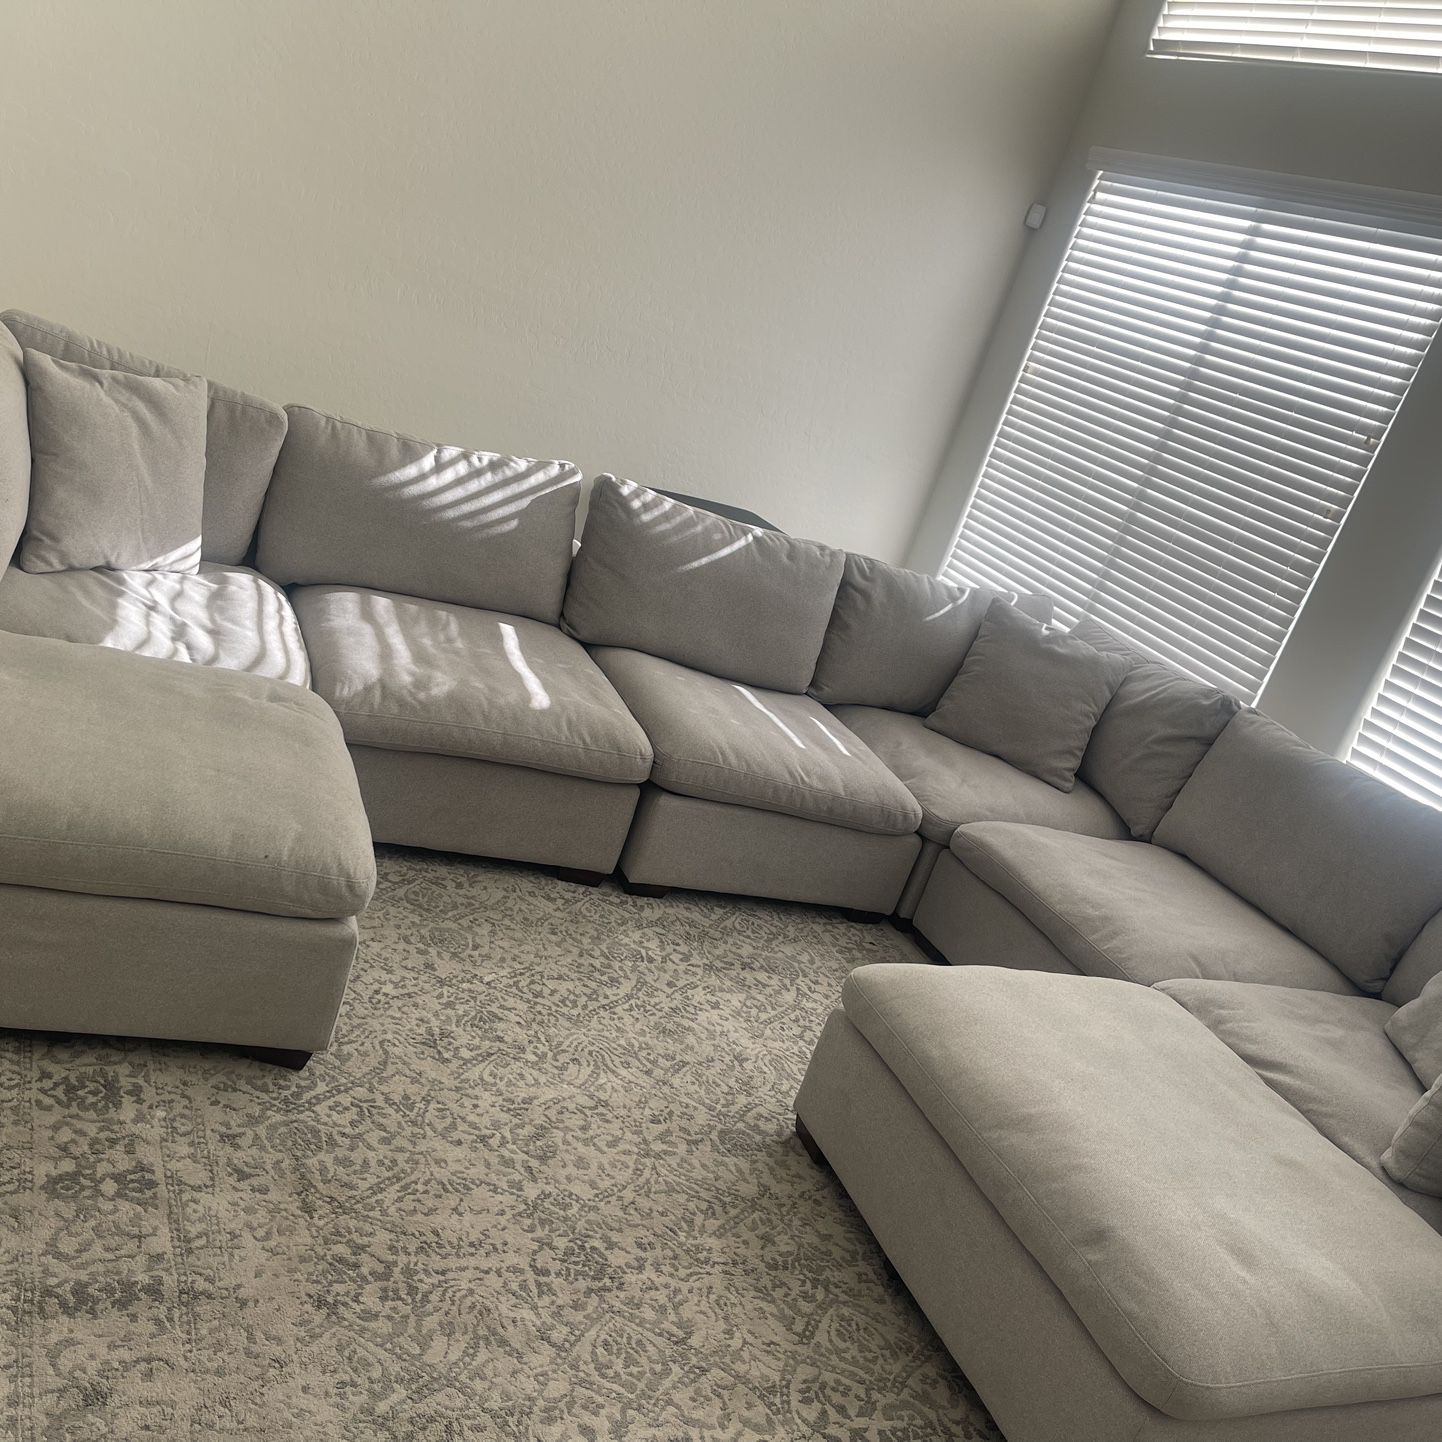 Large sectional Couch